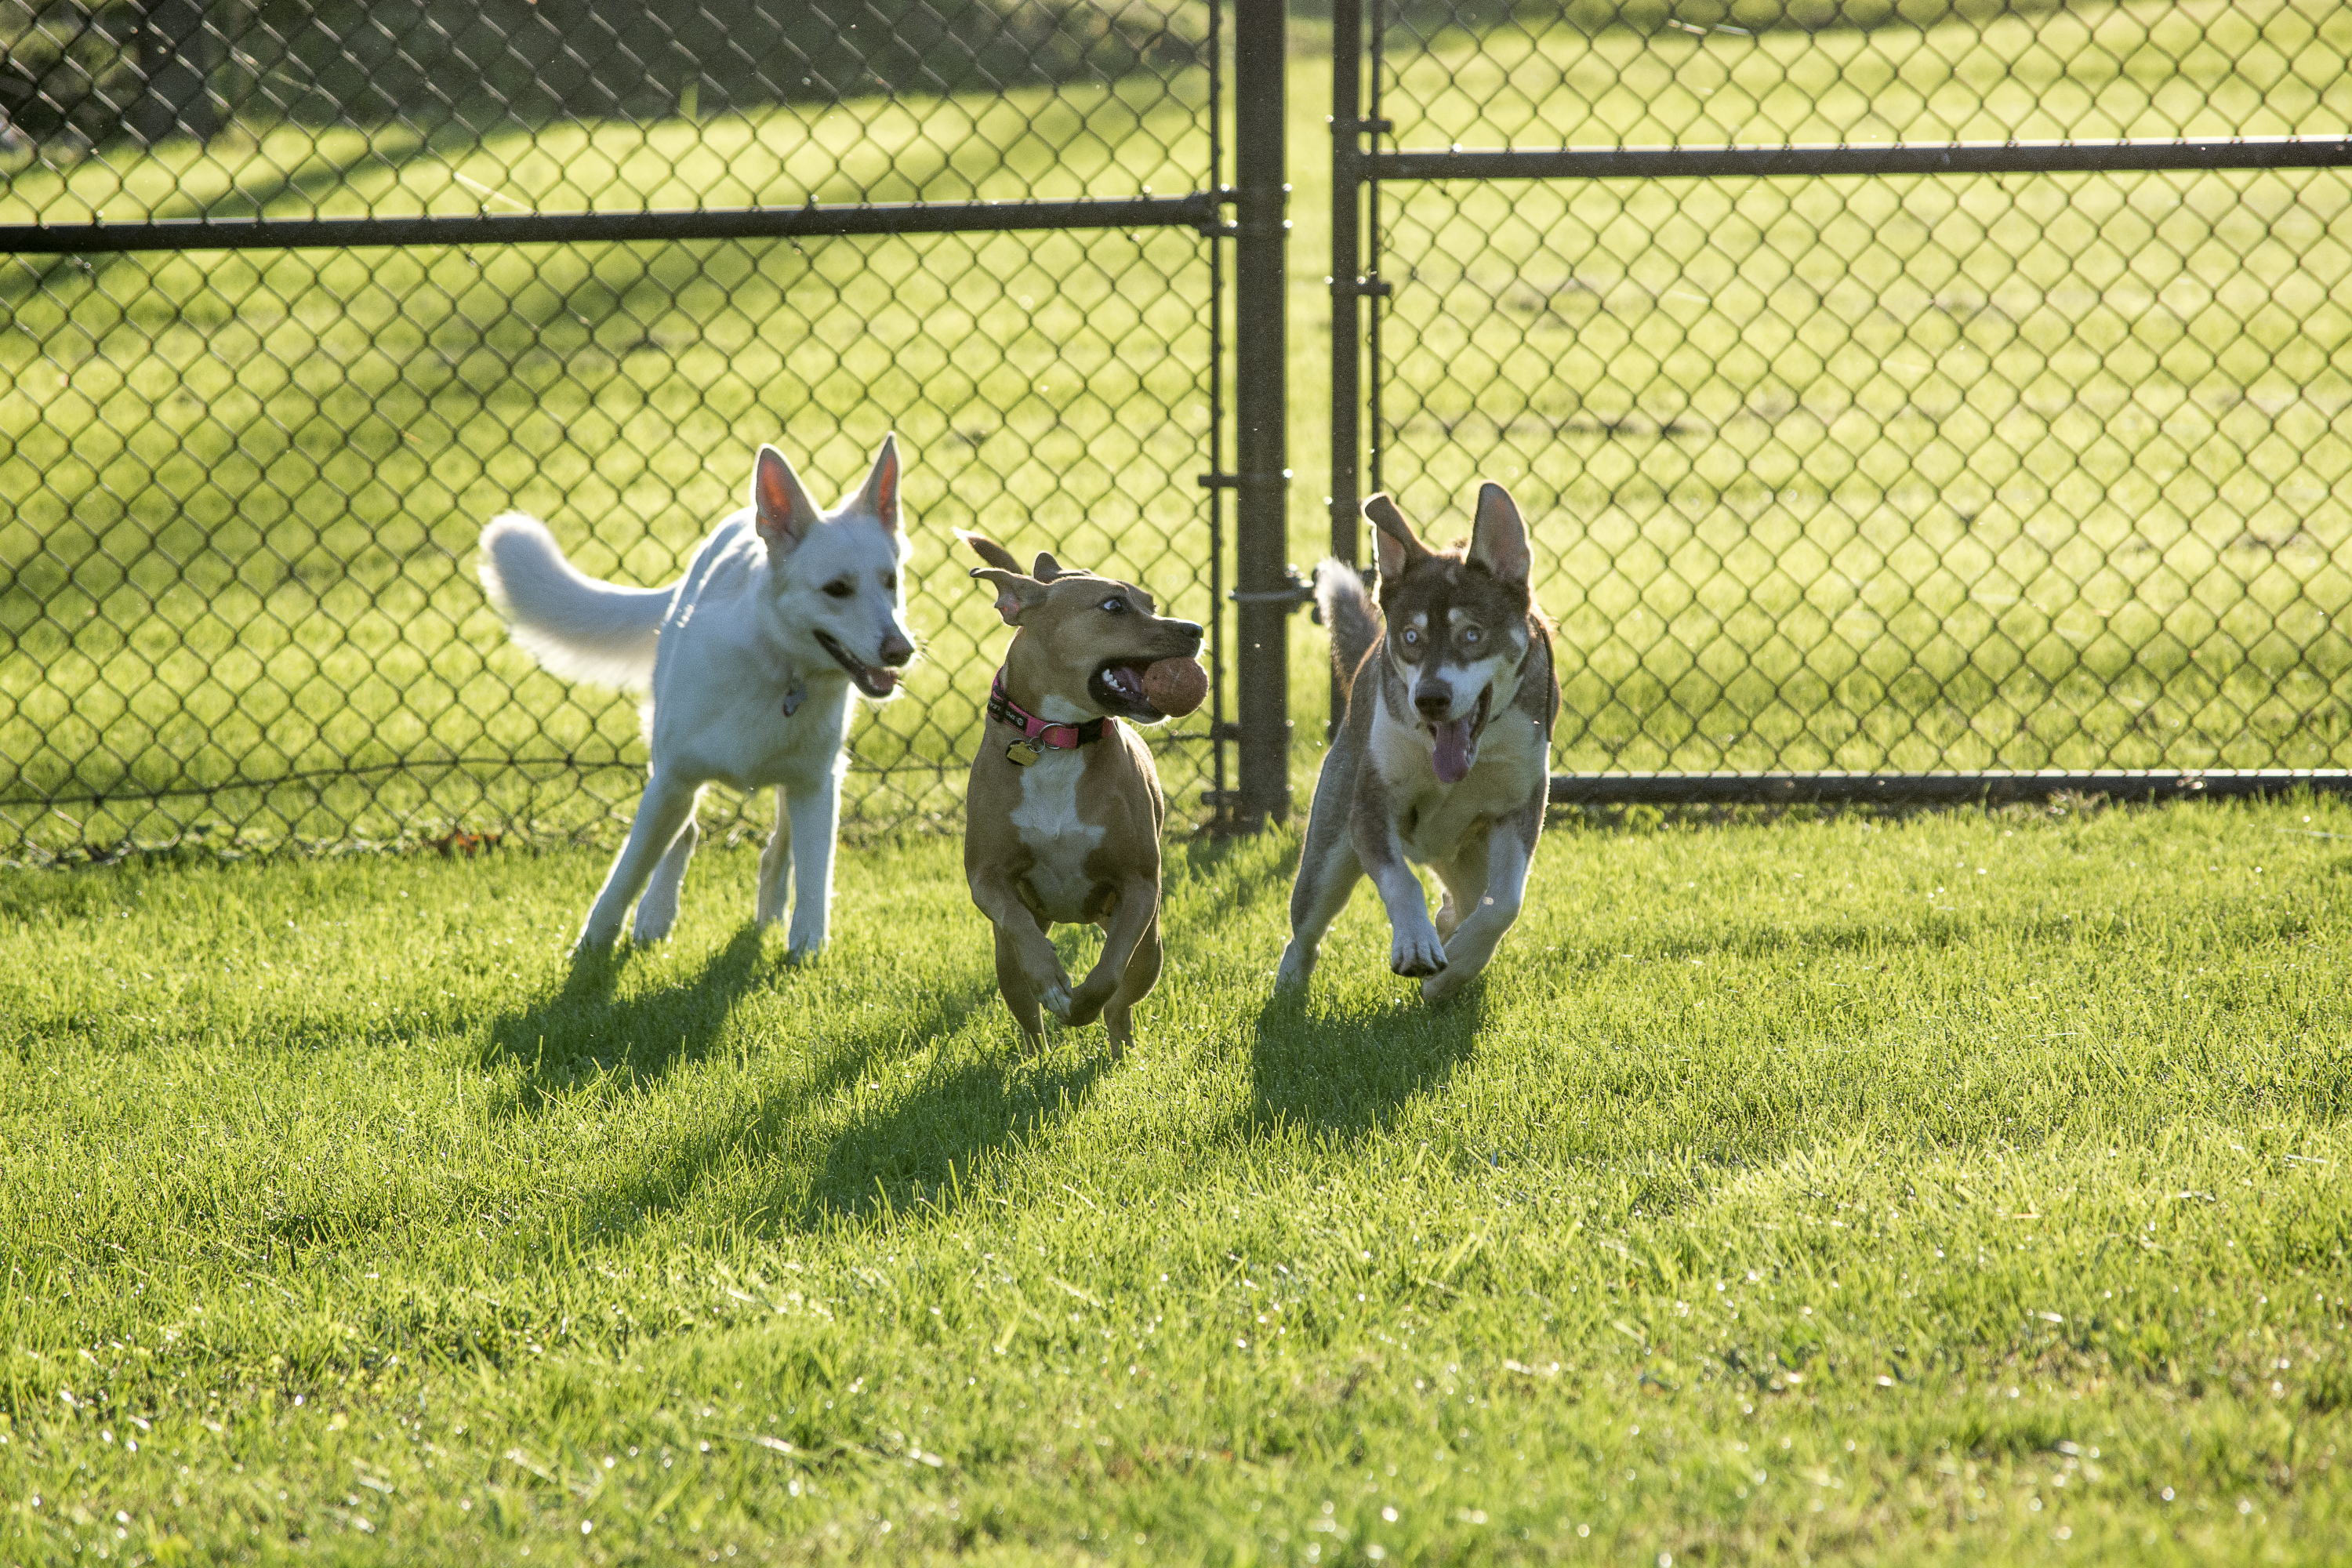 New dog park opens at Cooper River